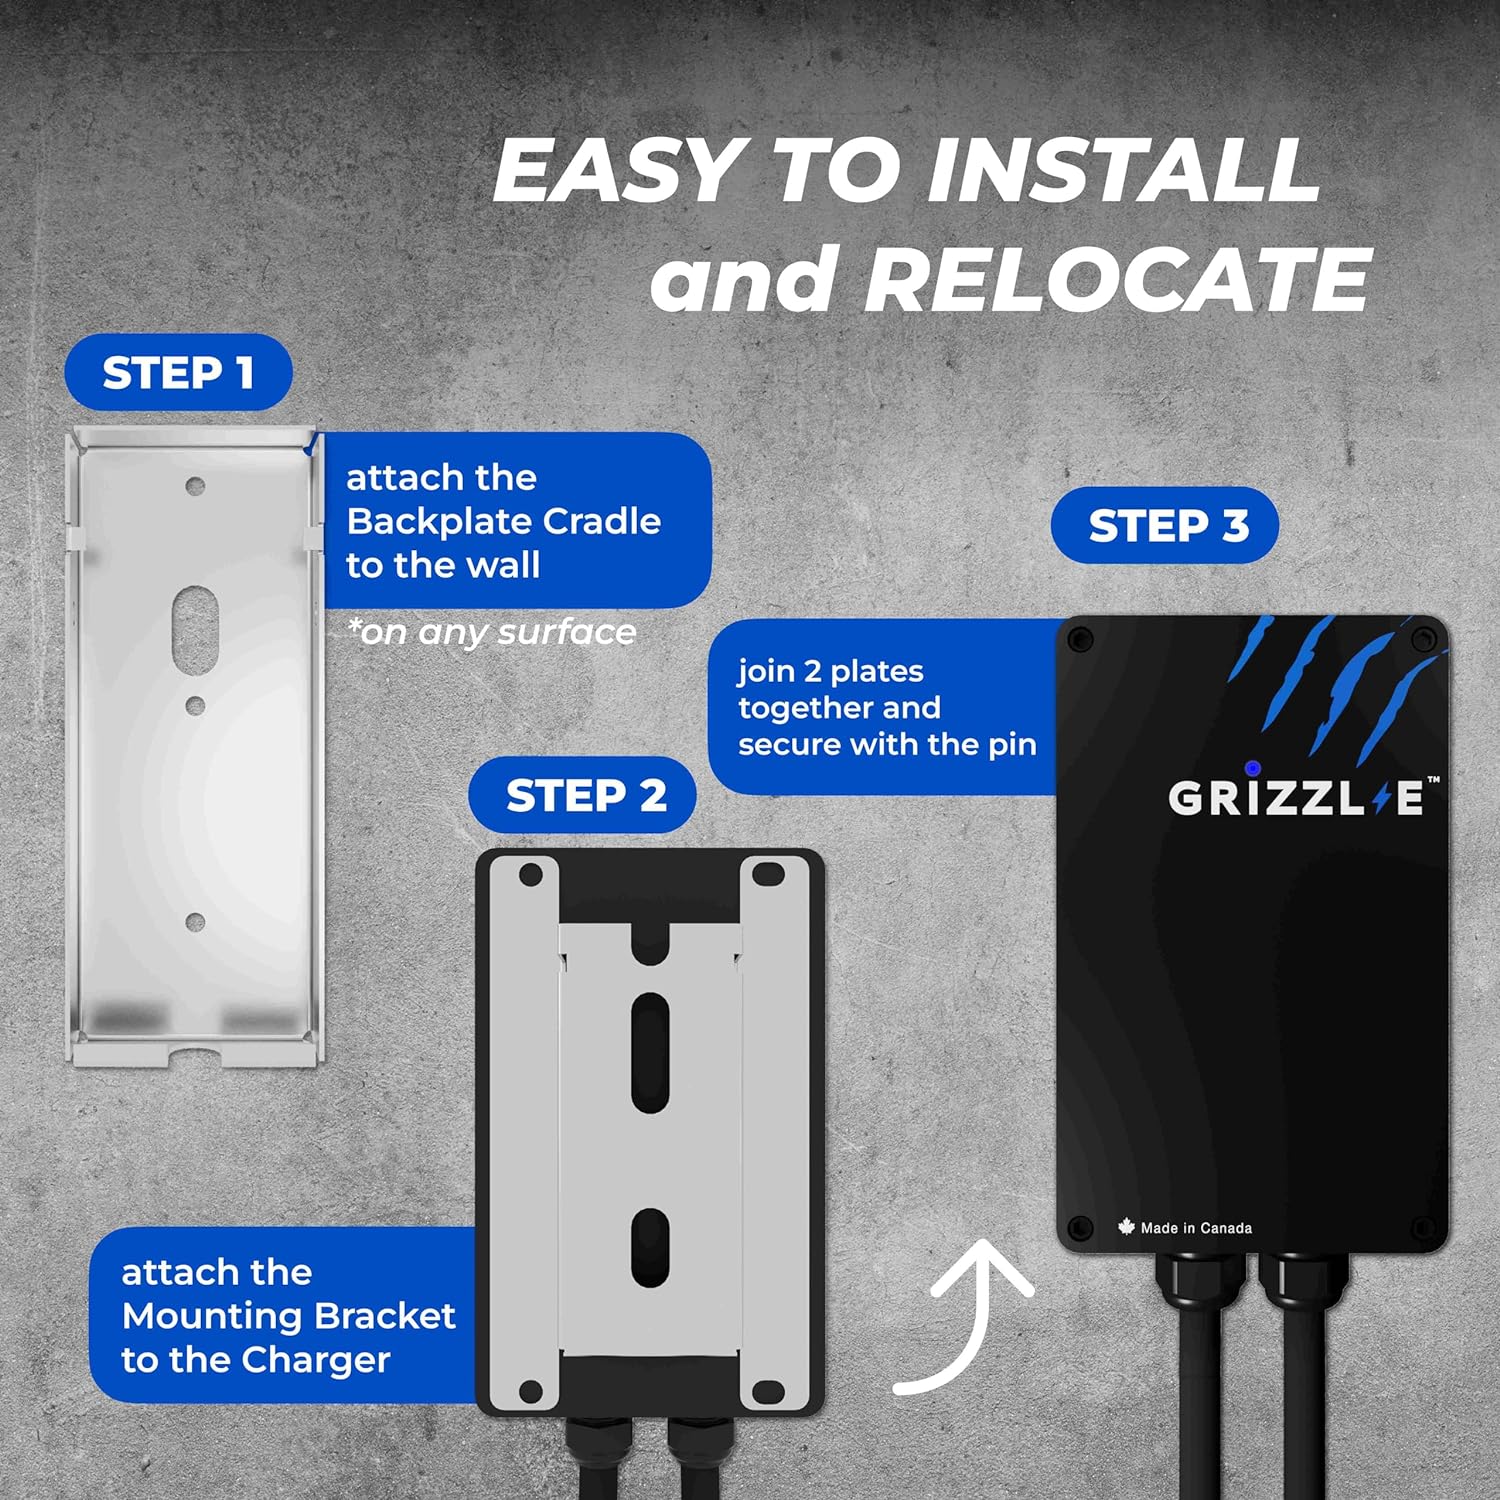 Grizzl-E Level 2 Electric Vehicle (EV) Charger Up to 40 Amp